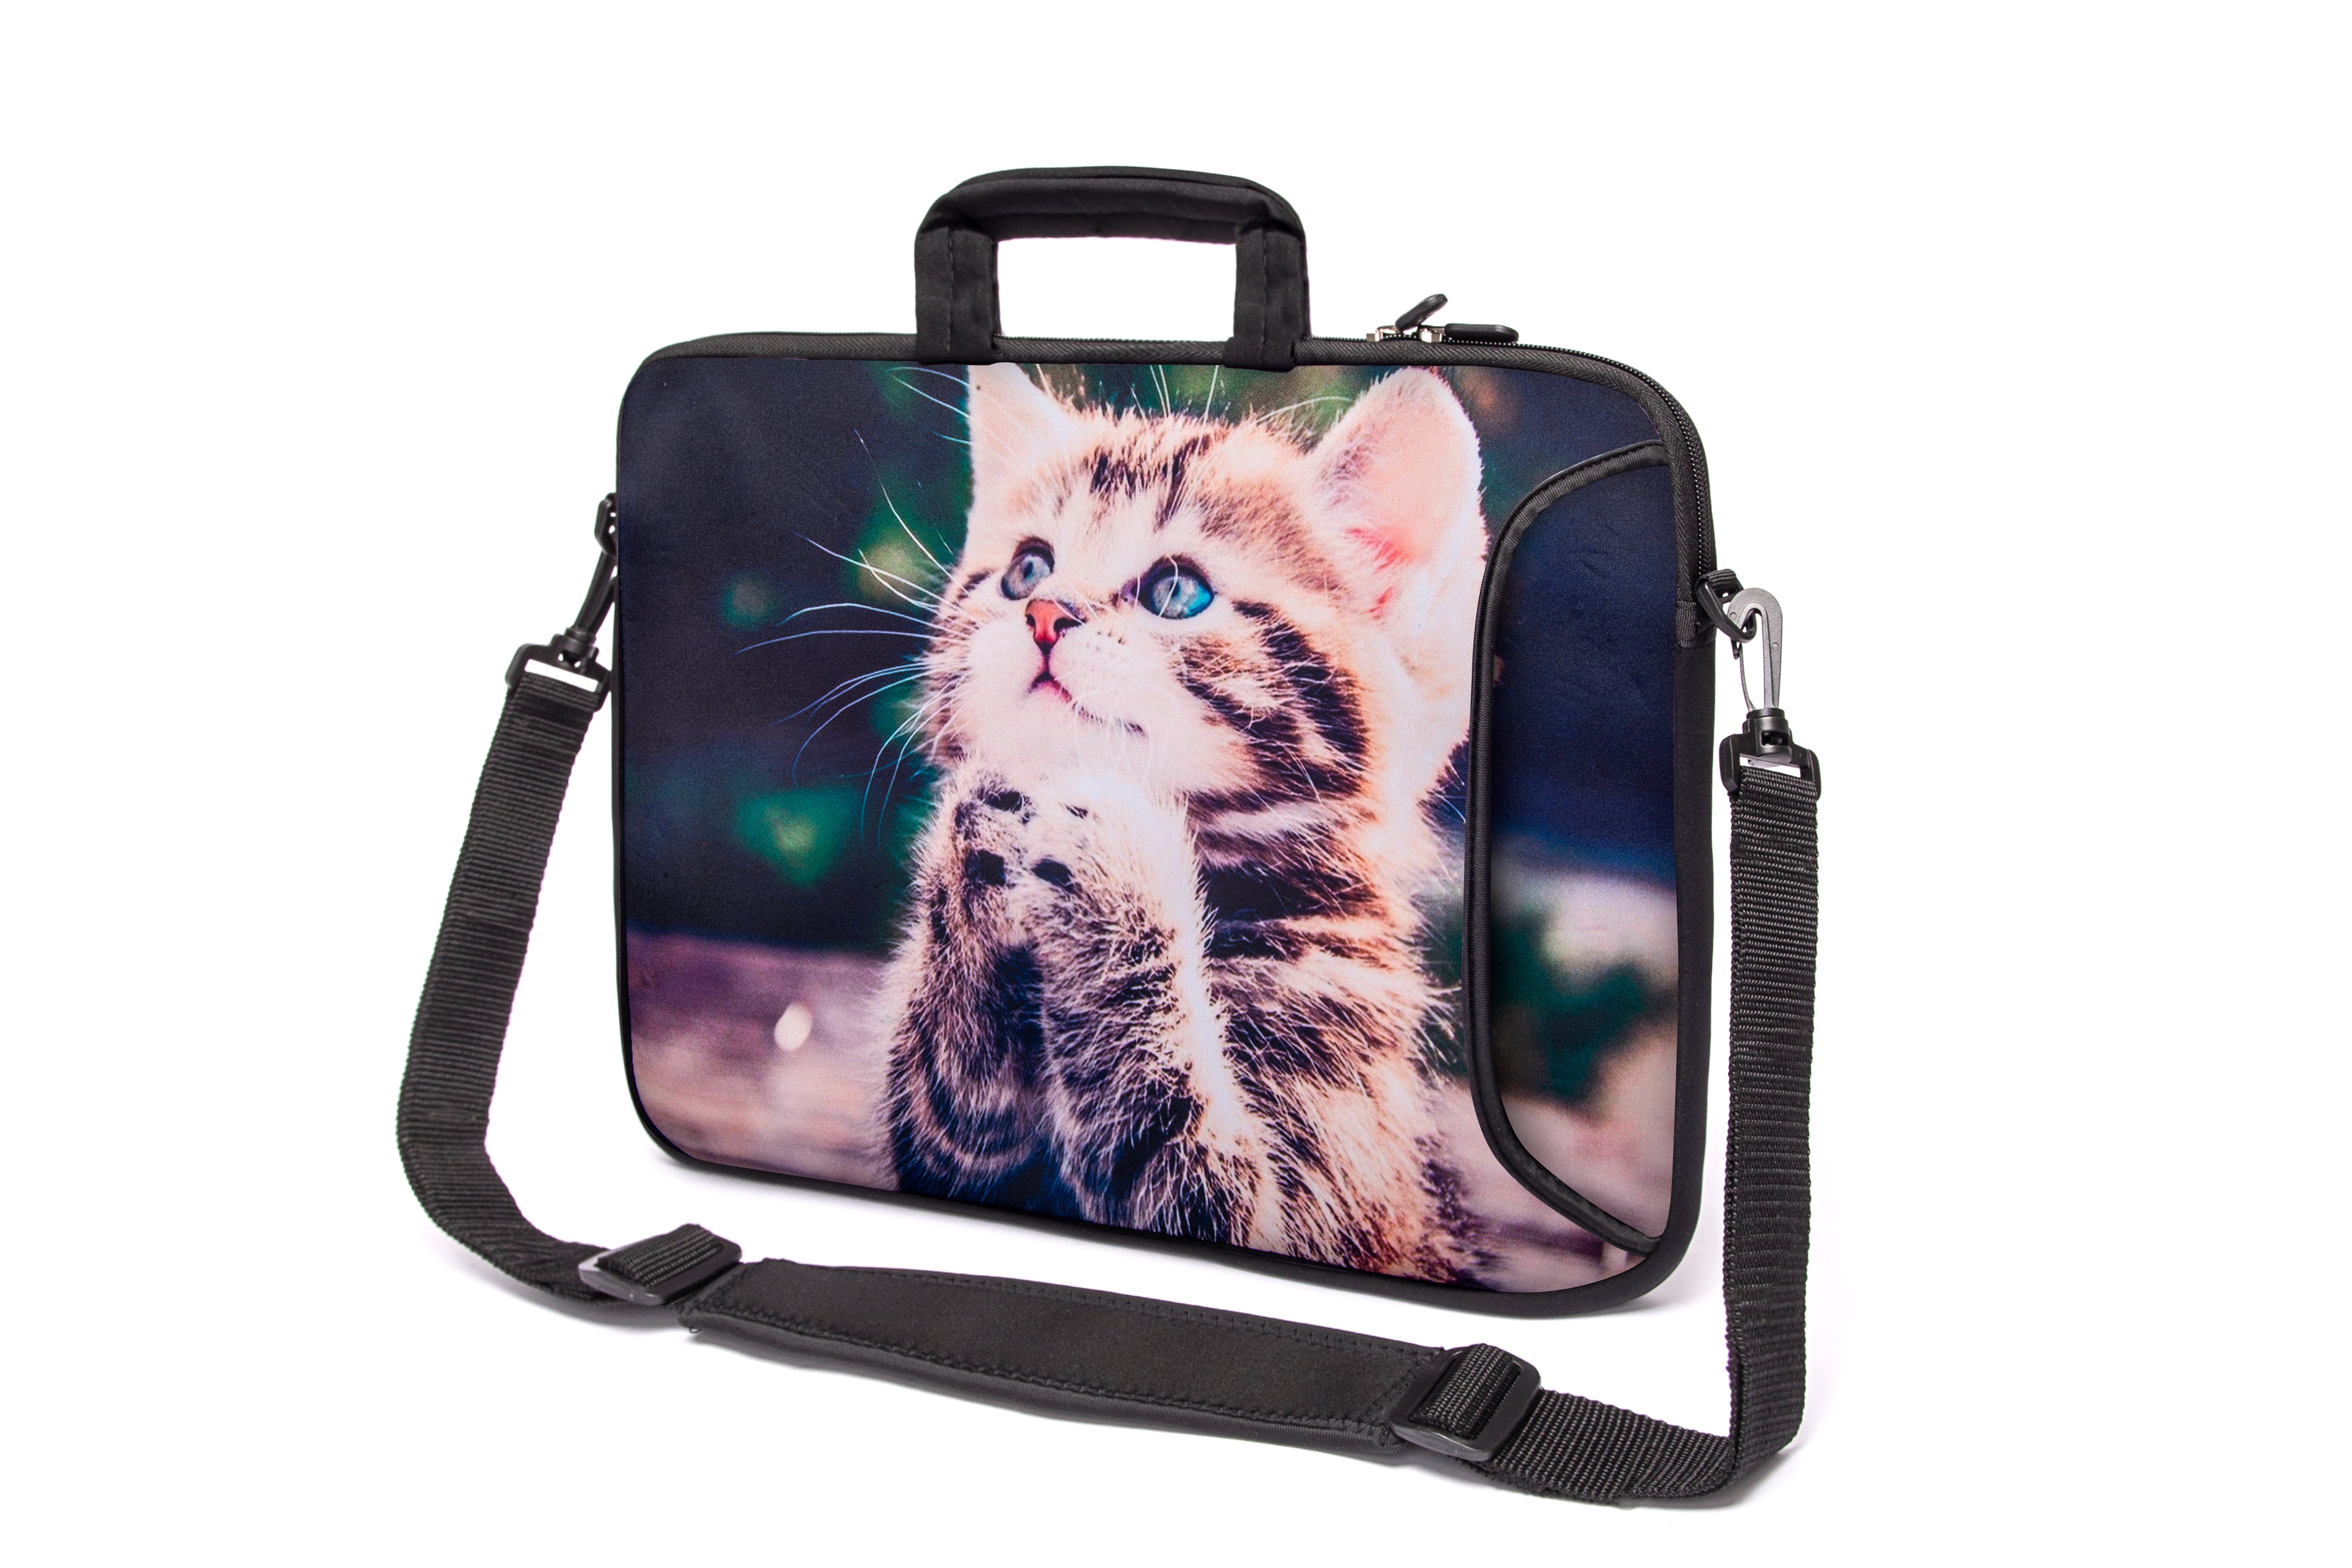 15"- 15.6" (inch) LAPTOP BAG CARRY CASE/BAG WITH HANDLE & STRAP NEOPRENE FOR LAPTOPS/NOTEBOOKS, *Little Cat*